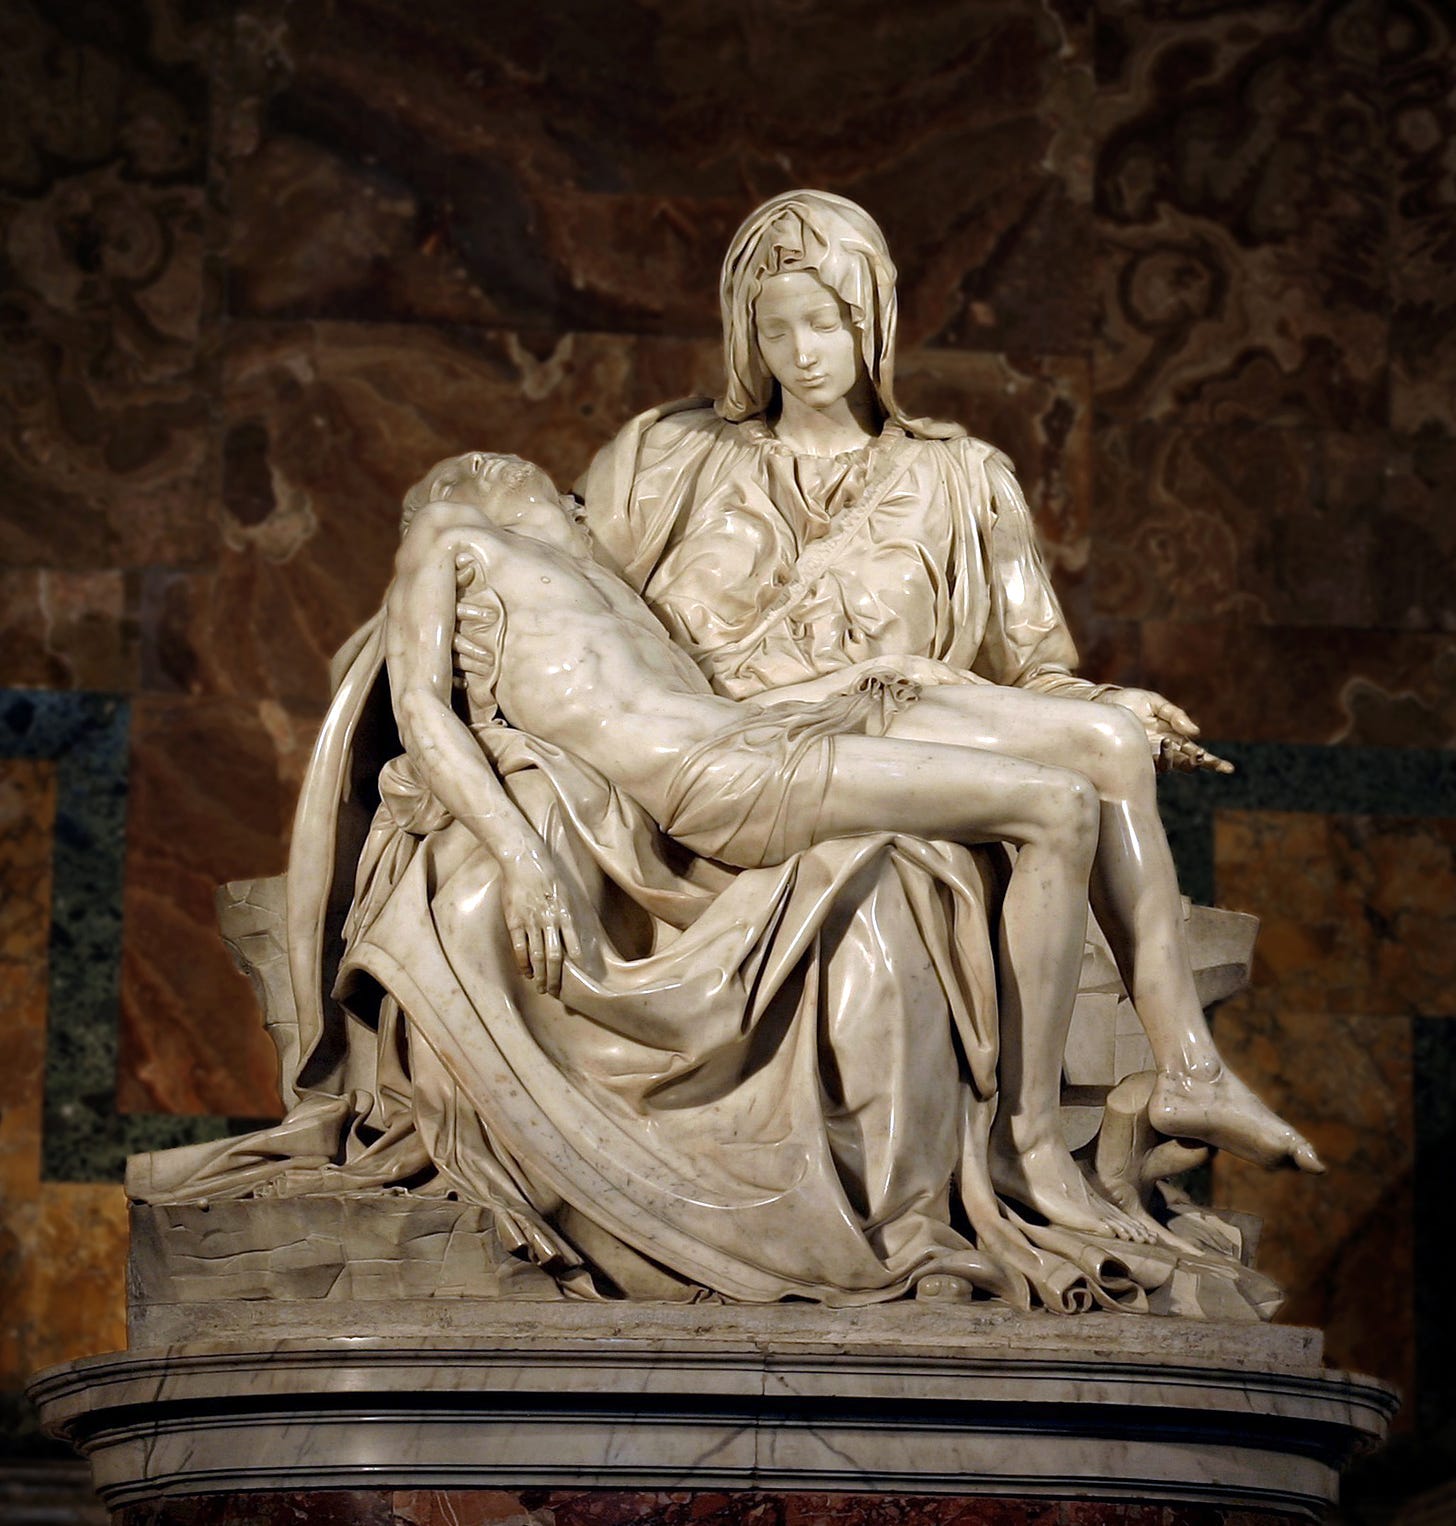 The statue features Mary holding Jesus's dead body